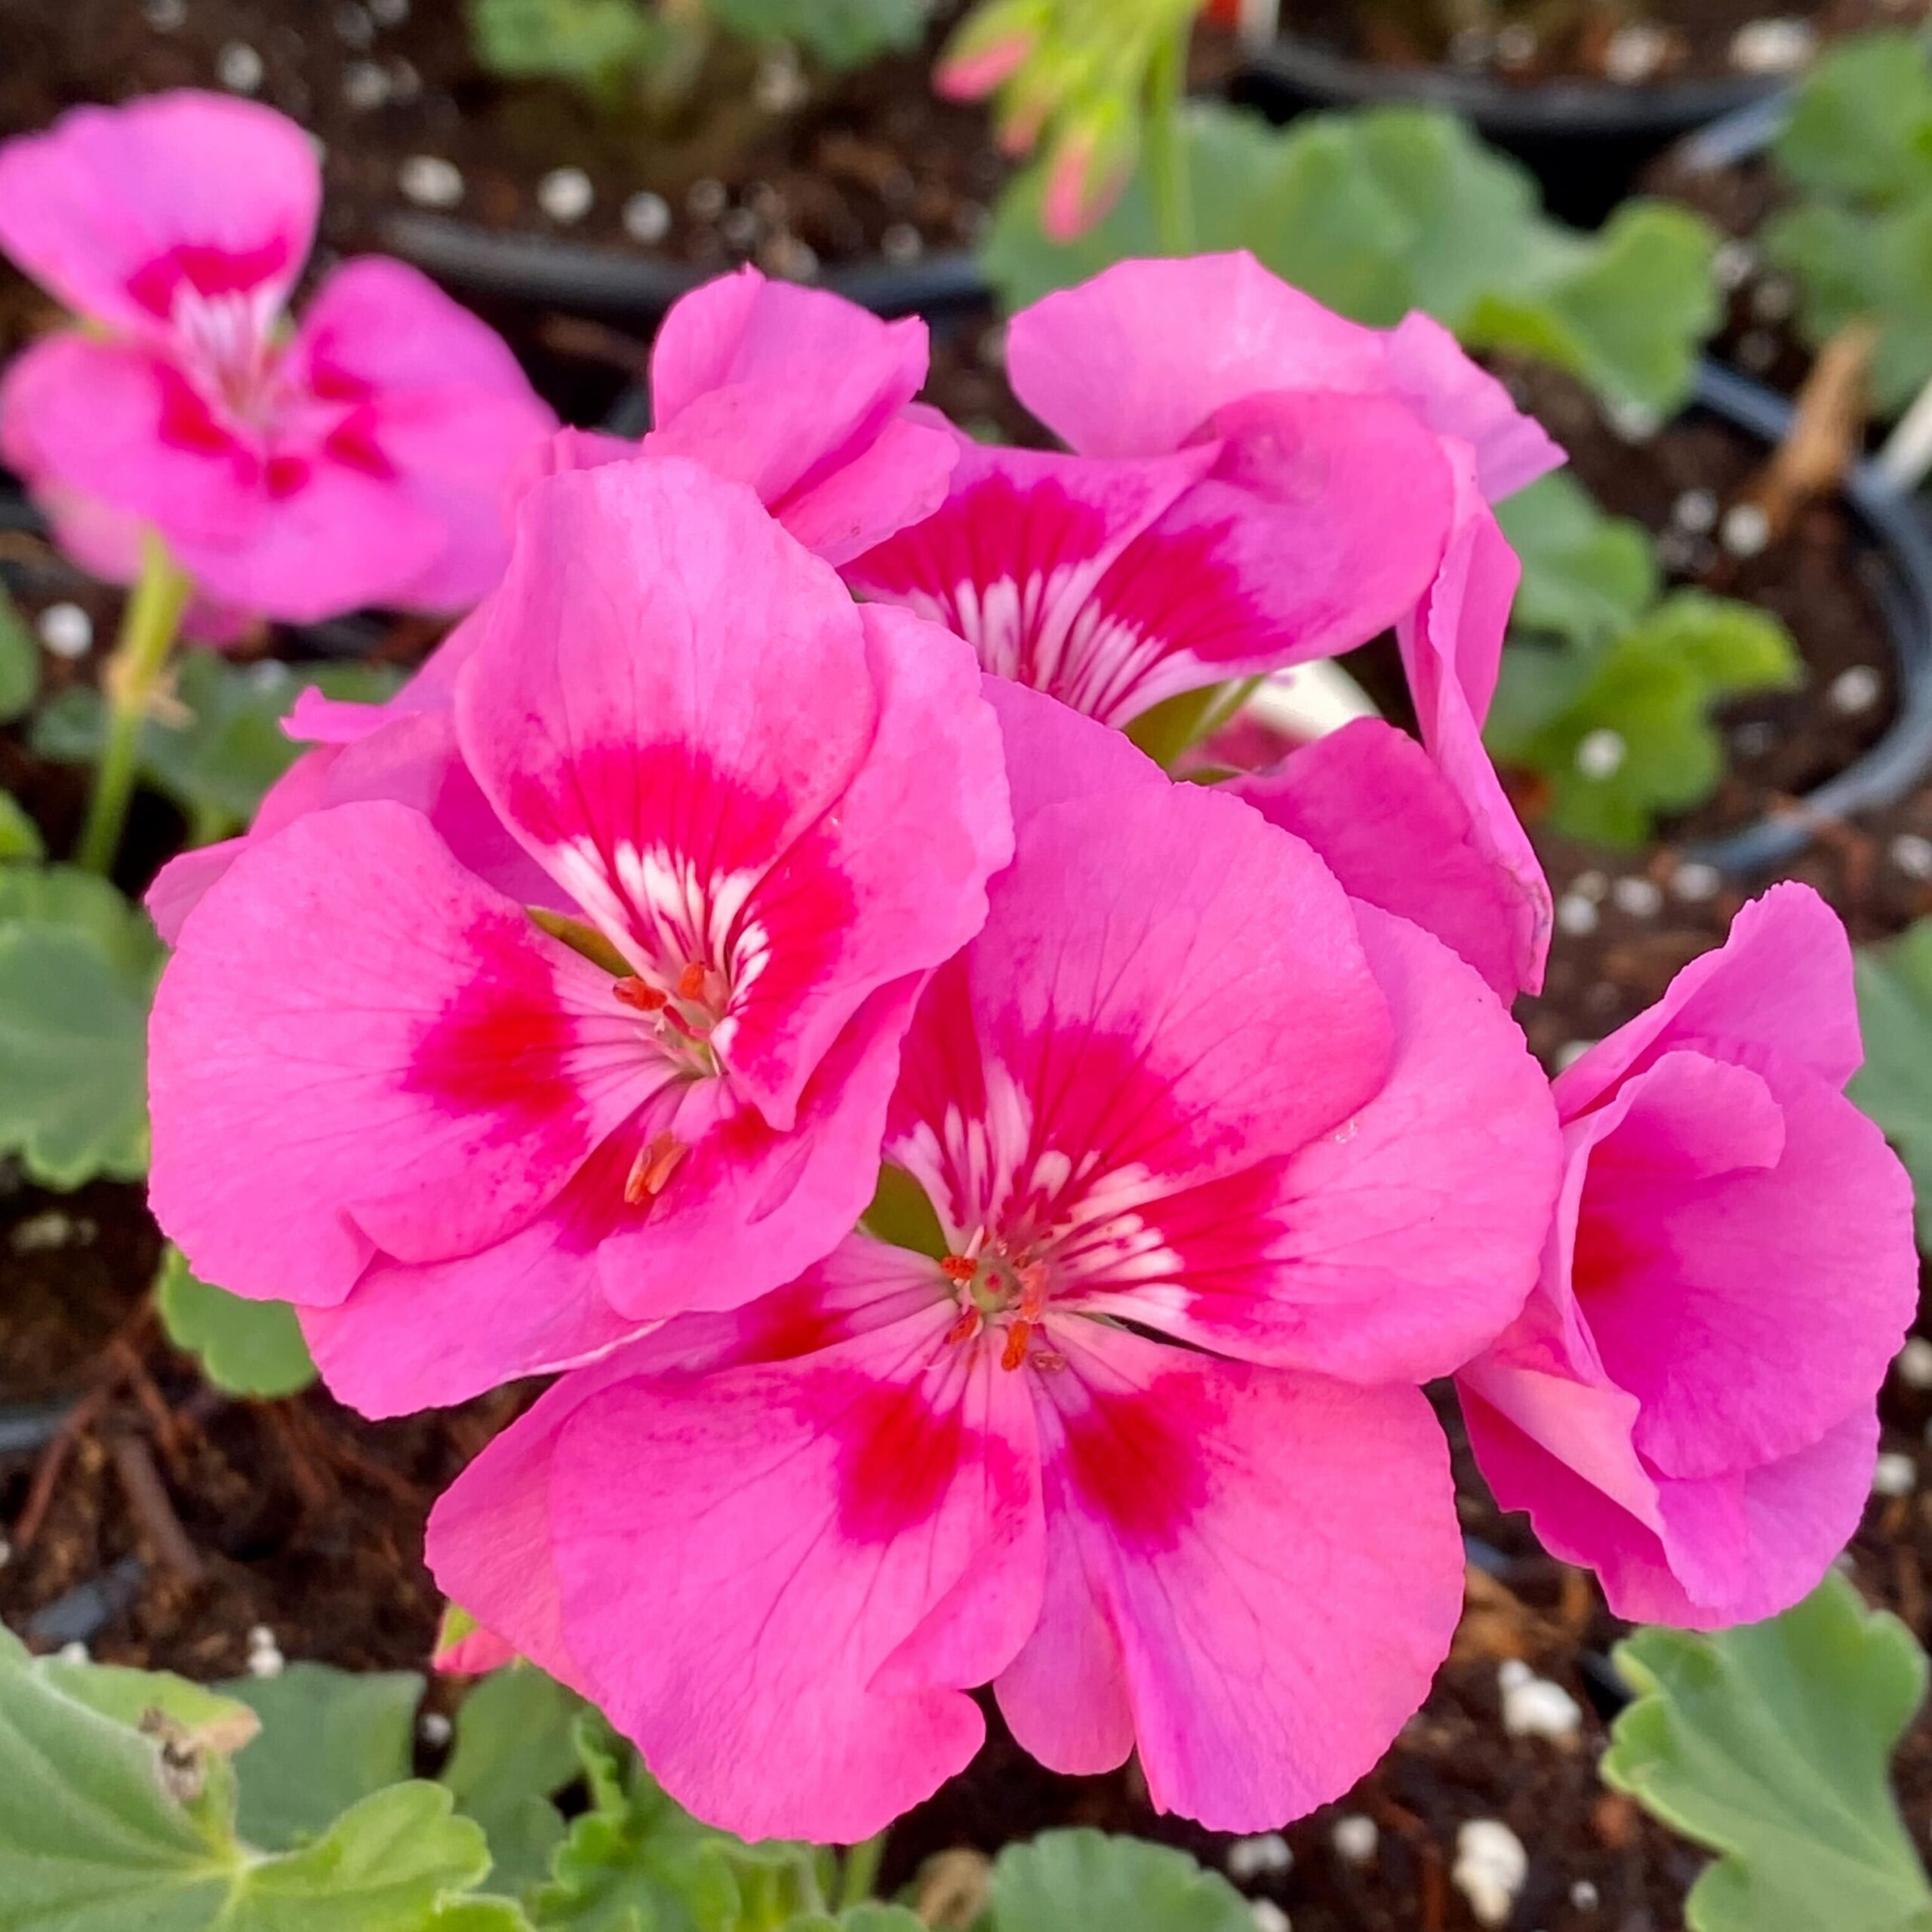 2022 Greenstreet Growers Wholesale Availability Landscaping Finished Annuals Dynamo Geranium Pink Flare